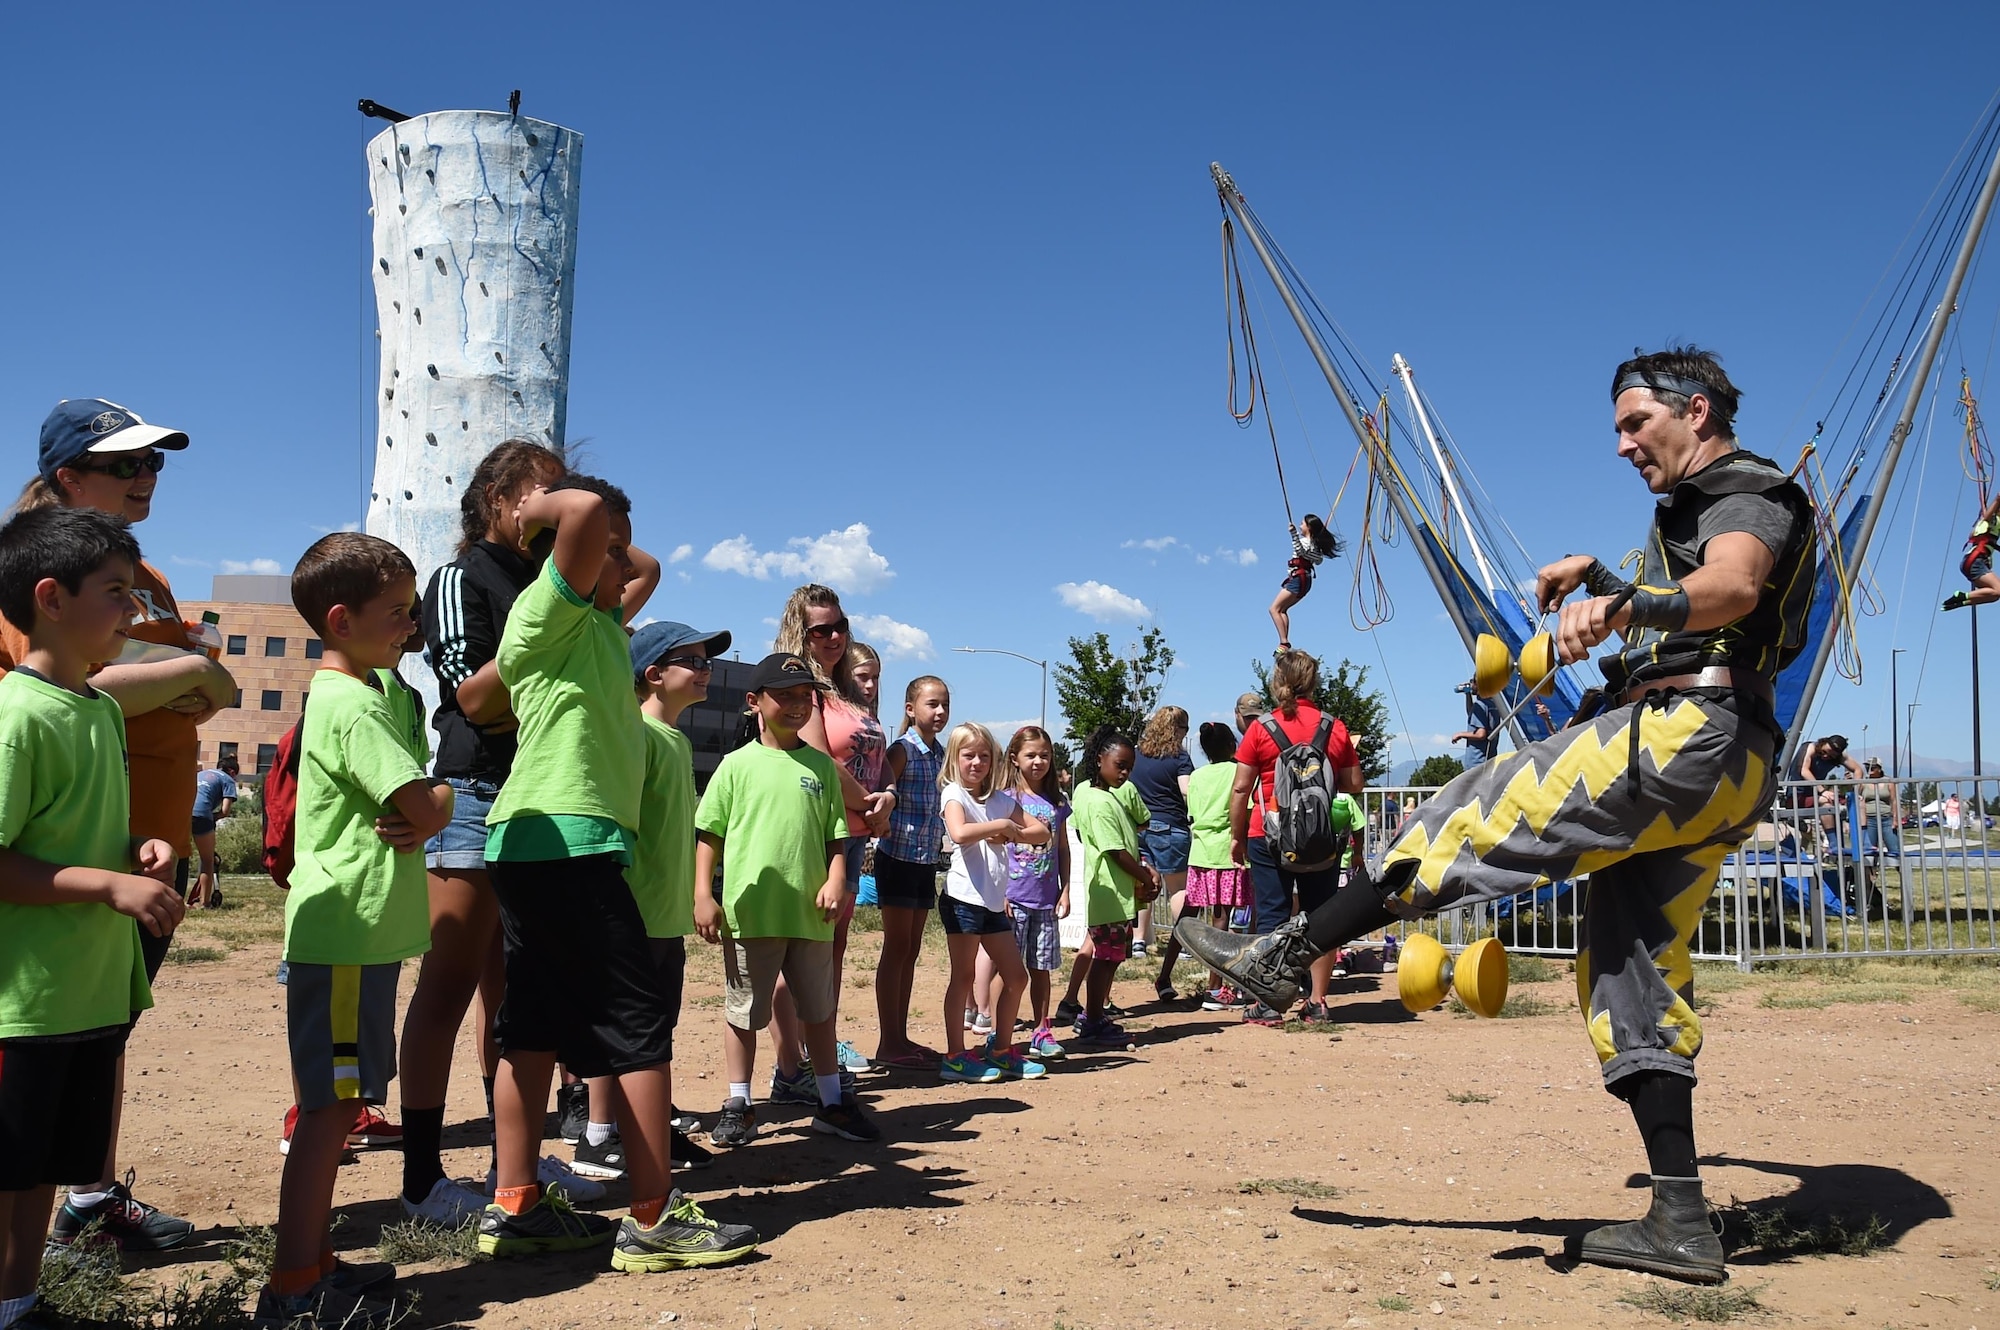 Etienne McGinley, aka Thunder M’Crack, acrobatix performer, juggles for a crowd during the Summer Slam Base Picnic at Schriever Air Force Base, Colorado, Friday, July 15, 2016. Performers and other guests entertained Airmen and families throughout the picnic. (U.S. Air Force photo/2nd Lt. Darren Domingo)